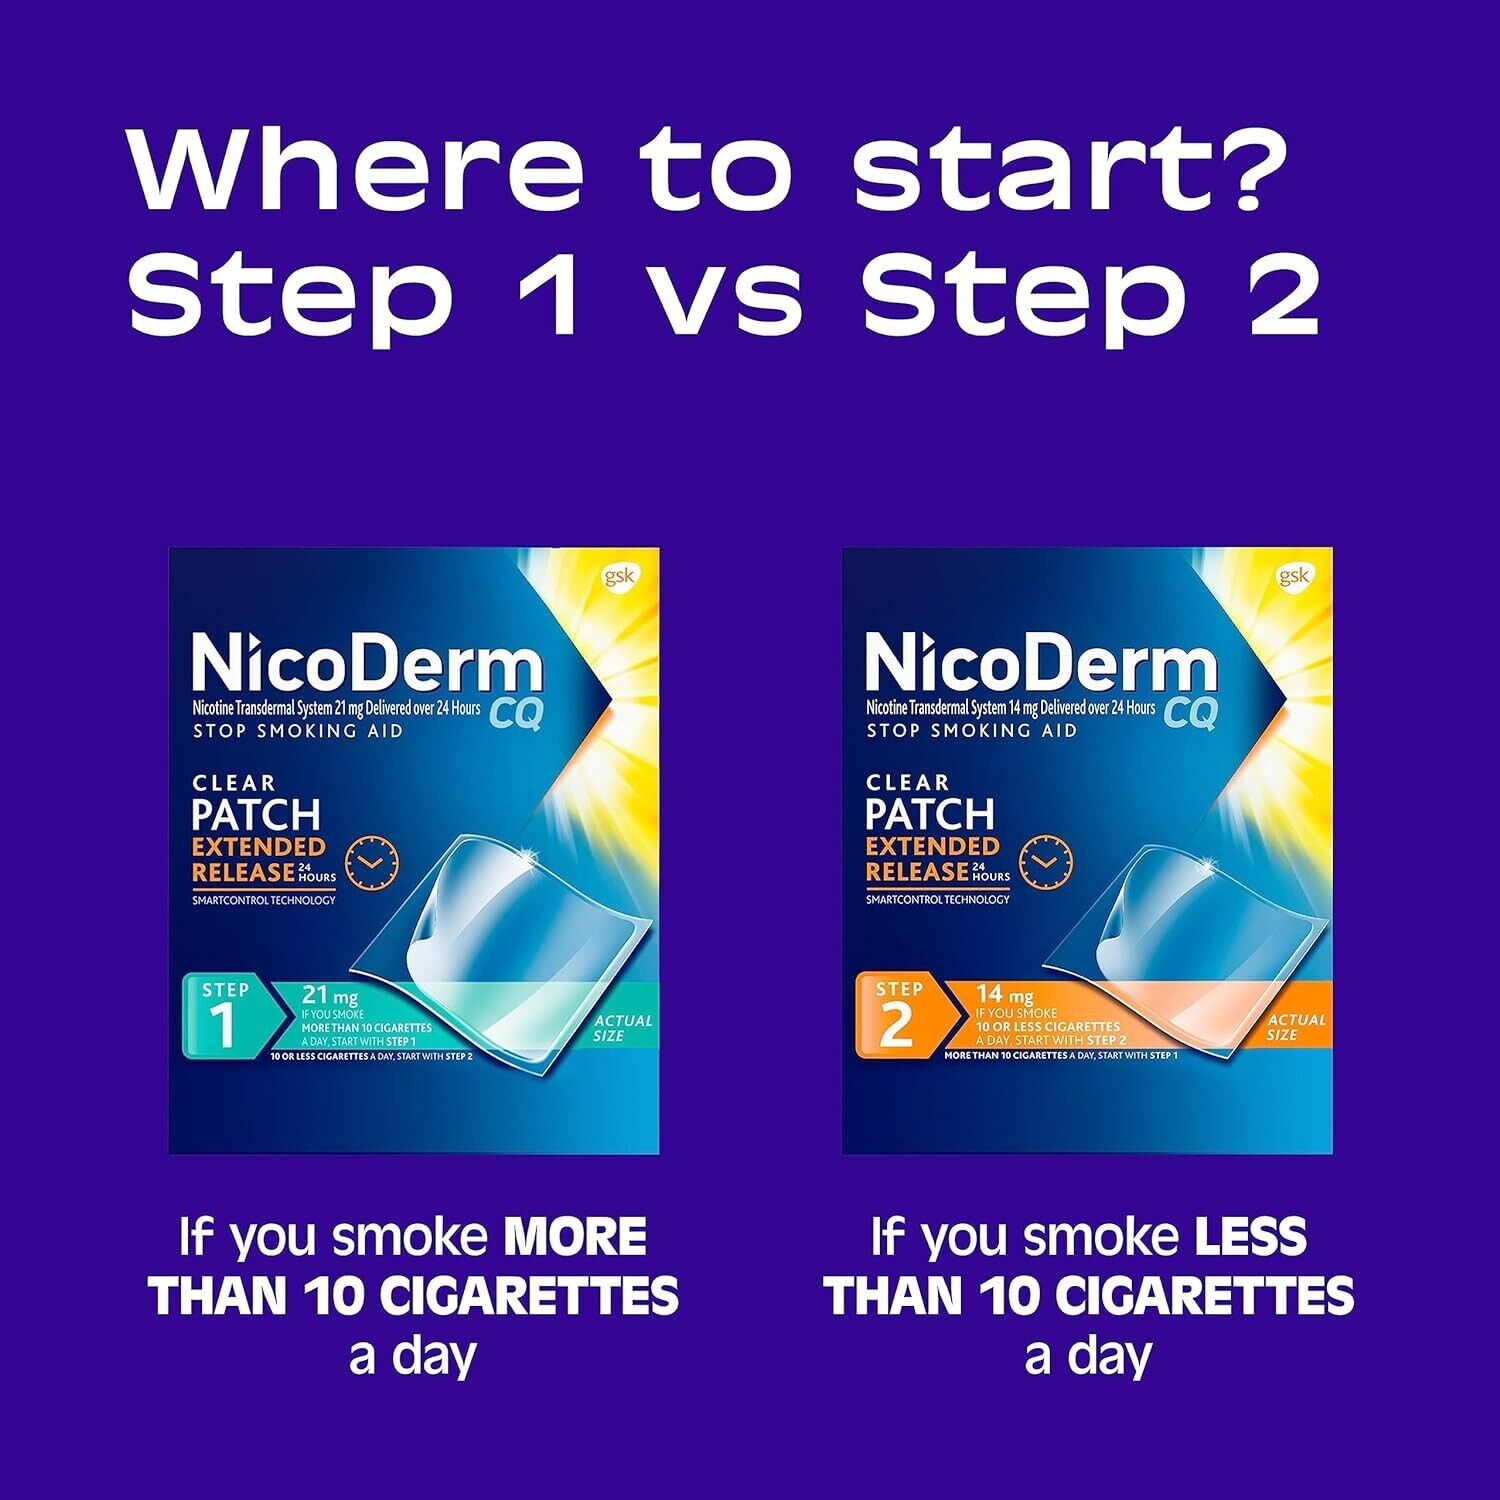 Nicotine Patches to Quit Smoking - 21 mg, 14 Count, Stop Smoking Aid Unbranded - фотография #11